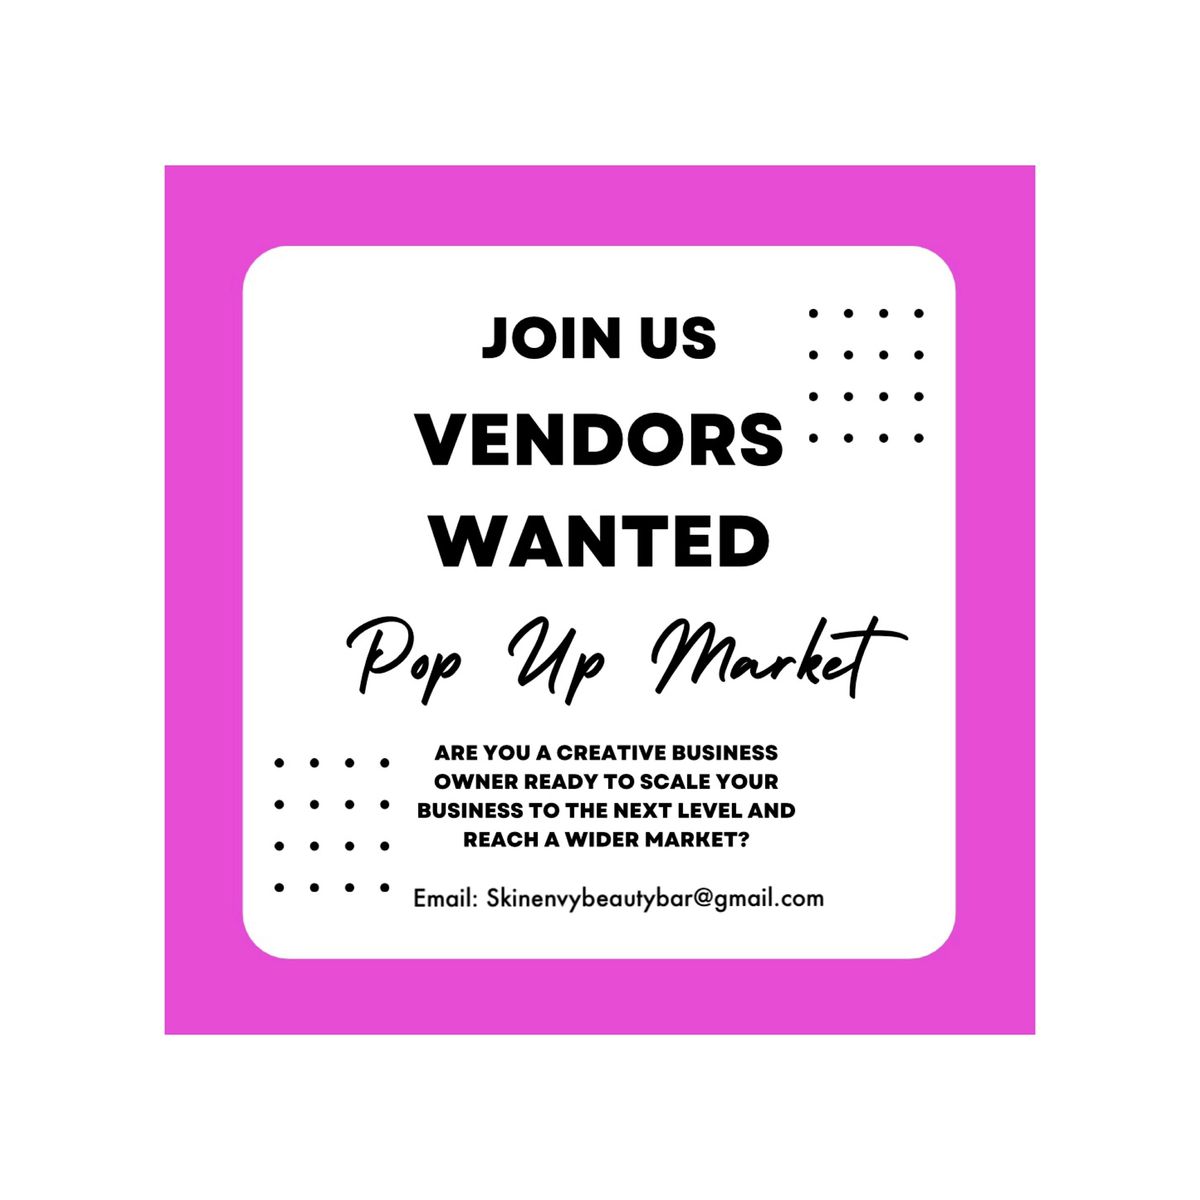 Vendors Wanted for Pop Up Market